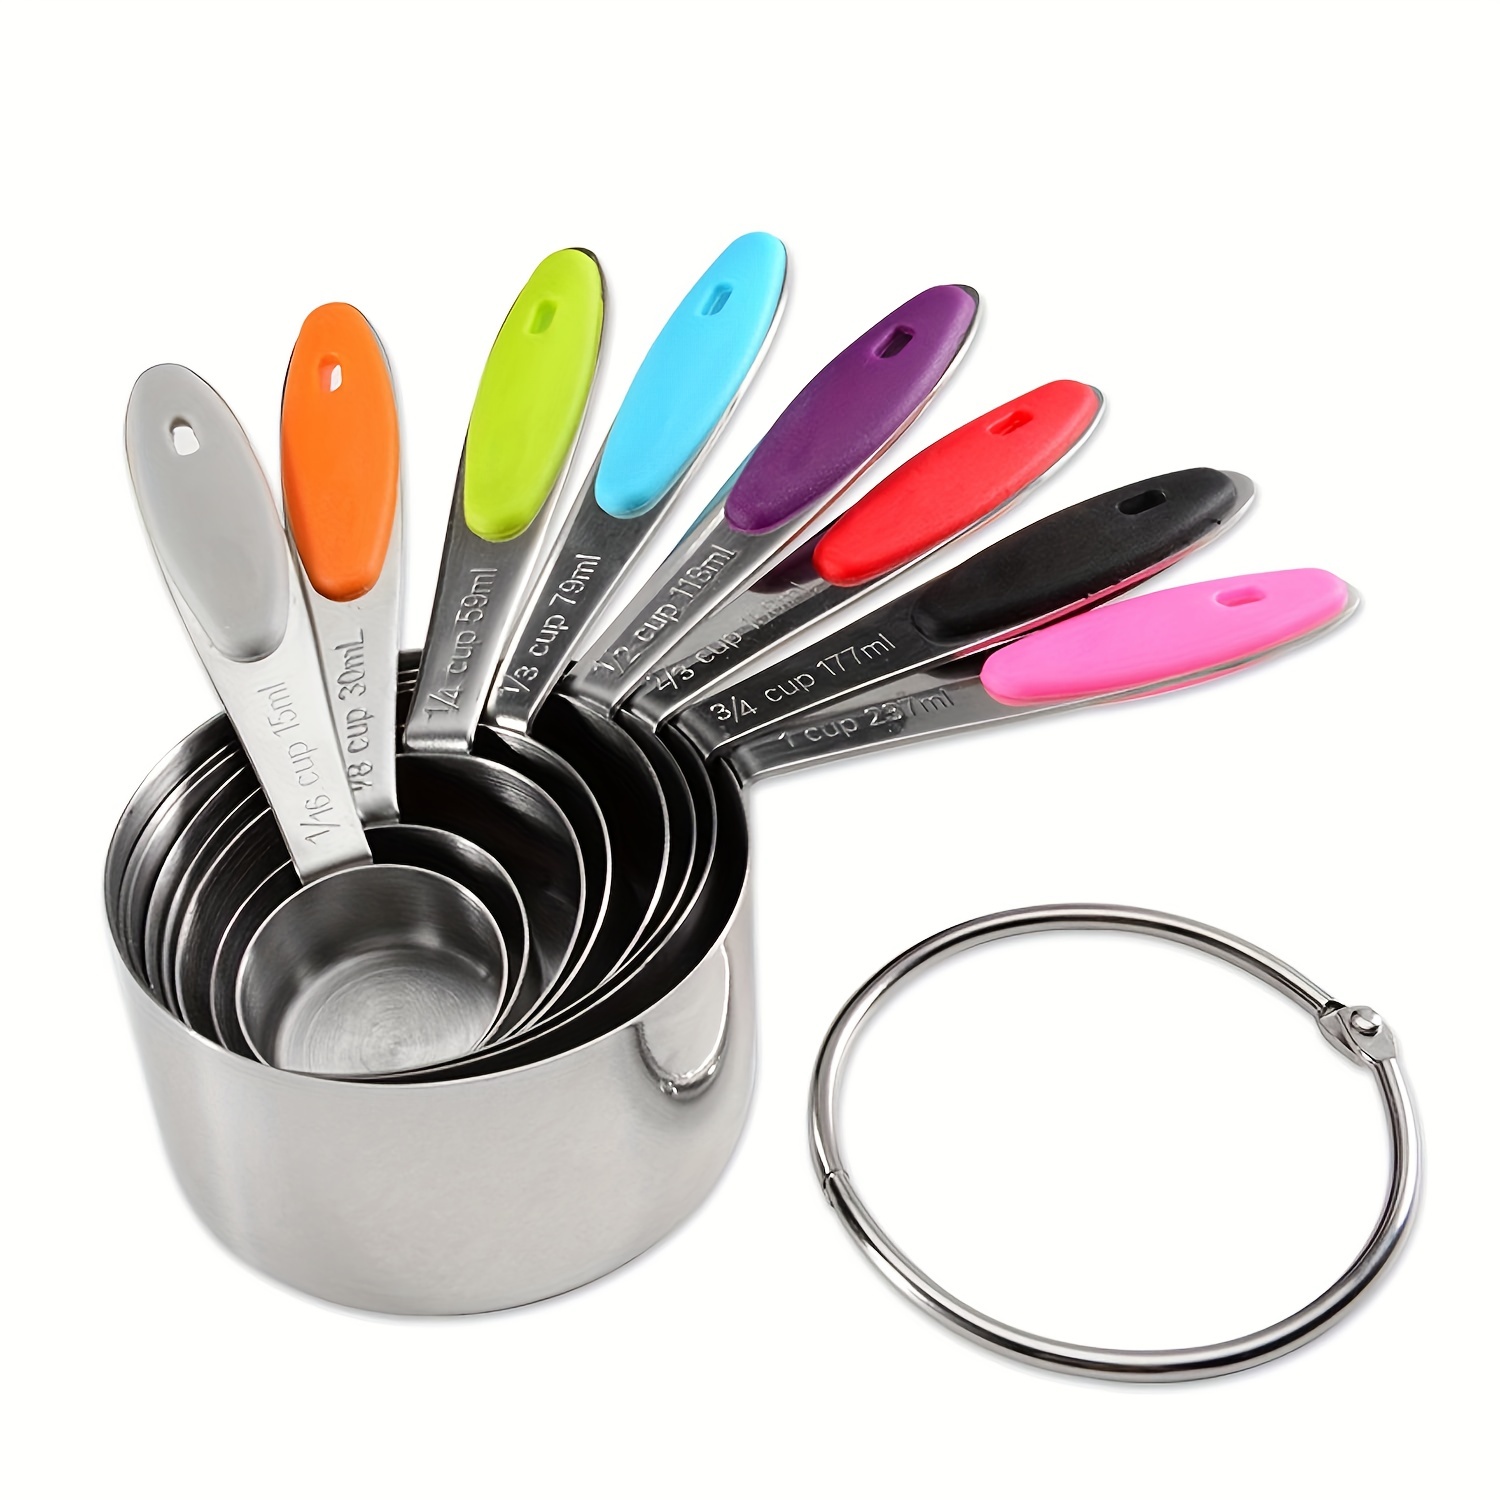 4 in 1 Silicone Telescopic Measuring Cups and 4 in 1 Measuring Spoons with Scale Measure Cups Spoons Kit Kitchen Tool (Random Color), Size: Medium